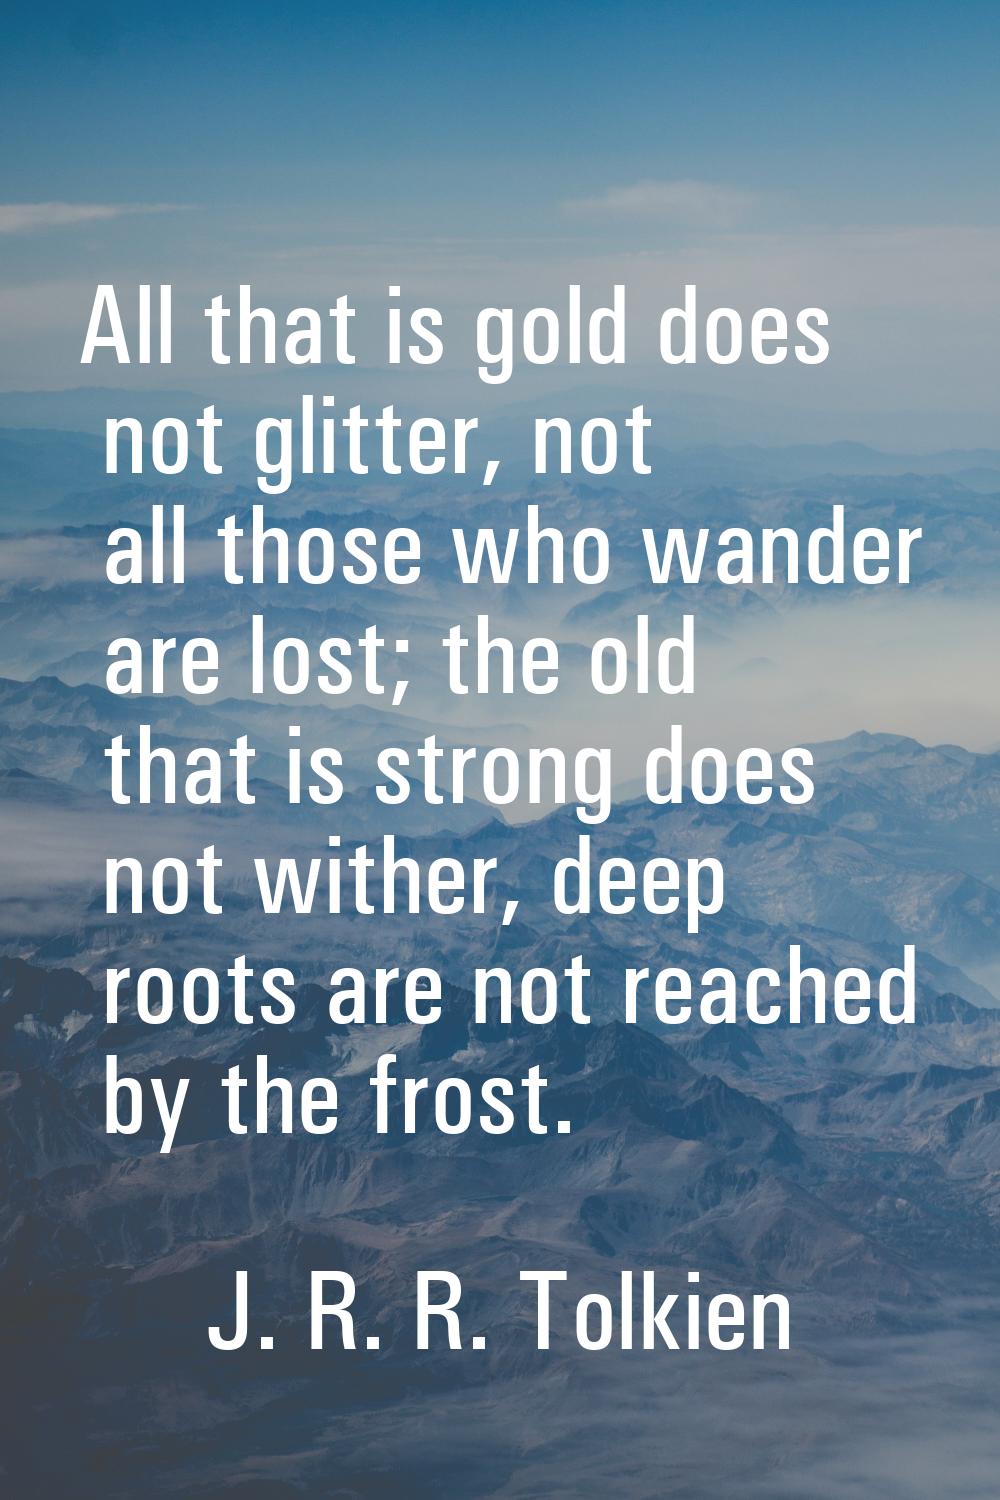 All that is gold does not glitter, not all those who wander are lost; the old that is strong does n